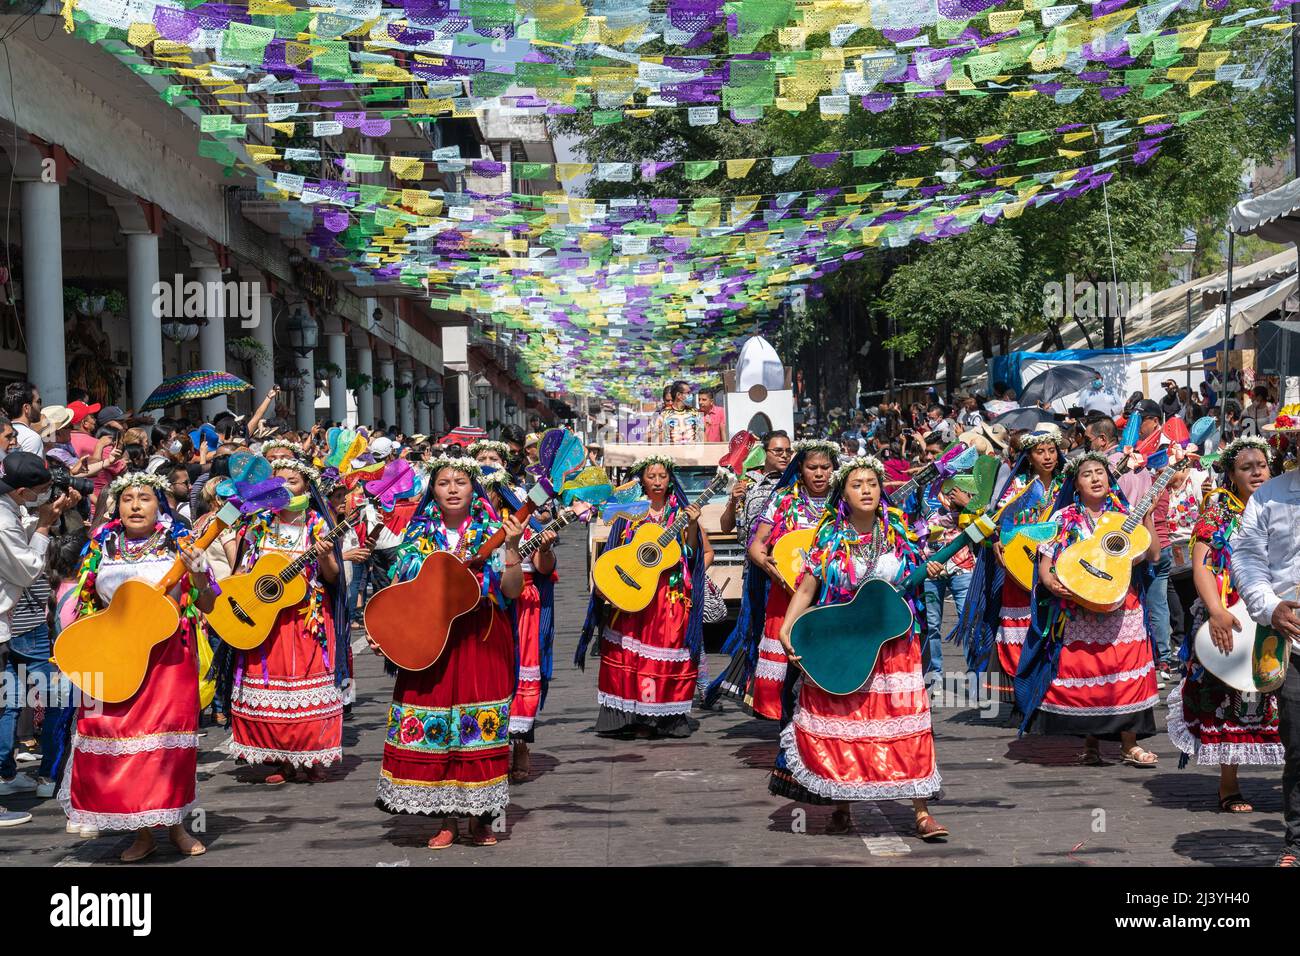 Uruapan, Mexico. 10th Apr, 2022. Mexican artisans from Paracho, known as the guitar city, parade down the street marking the start of the Palm Sunday Handcraft Market or Tianguis de Domingo de Ramos April 9, 2022 in Uruapan, Michoacan, Mexico. The village of Paracho, was the inspiration for the hit Disney movie ‘Coco'. Credit: Richard Ellis/Richard Ellis/Alamy Live News Stock Photo